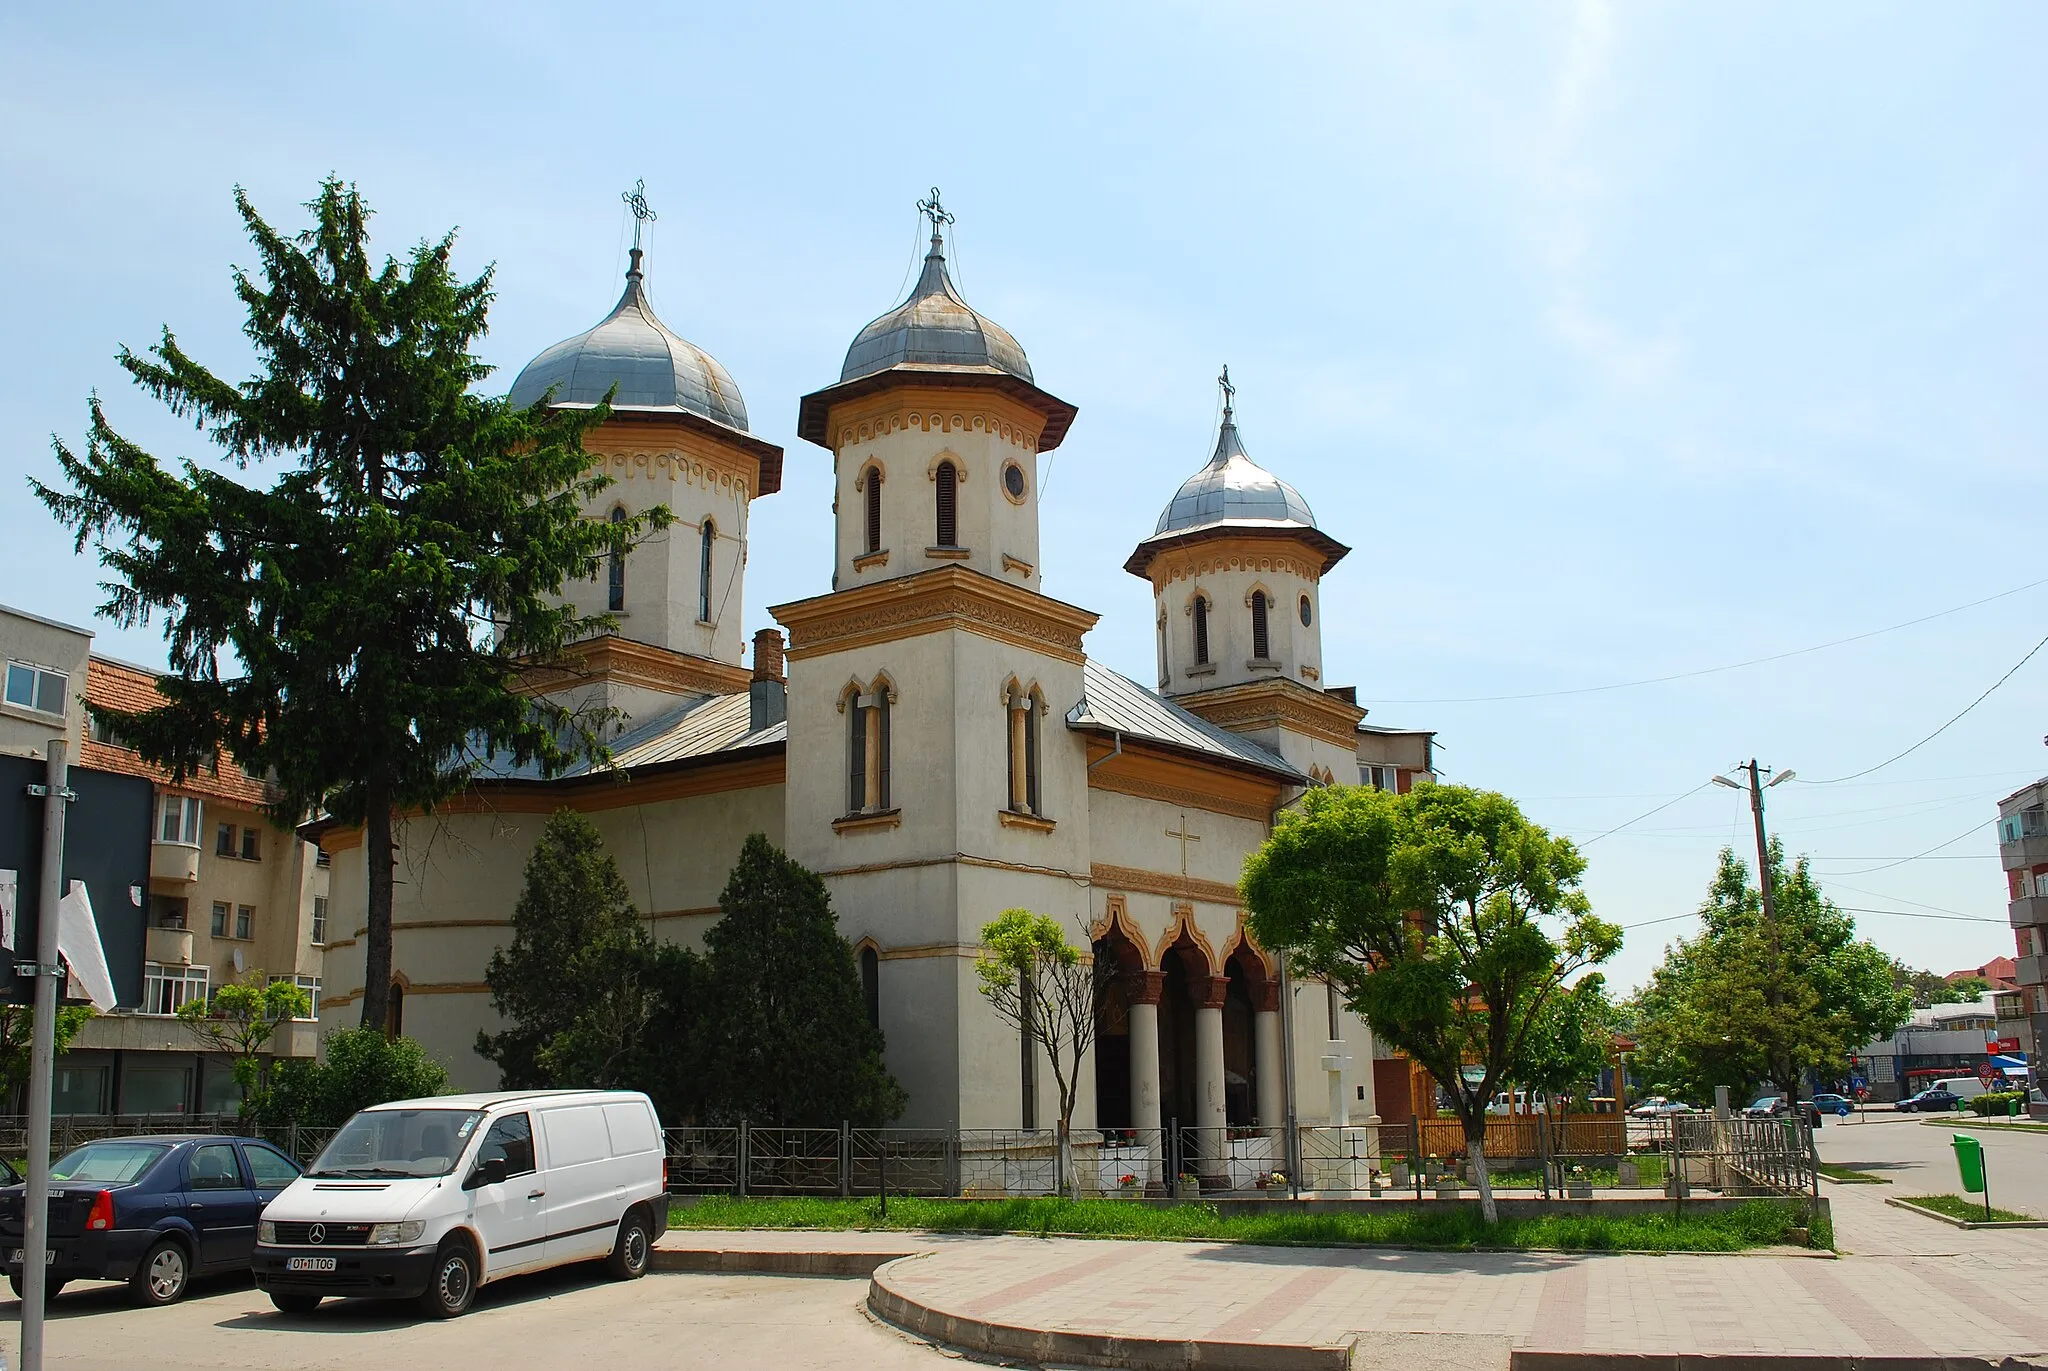 Photo showing: The Dormition orthodox church in Caracal, Romania.